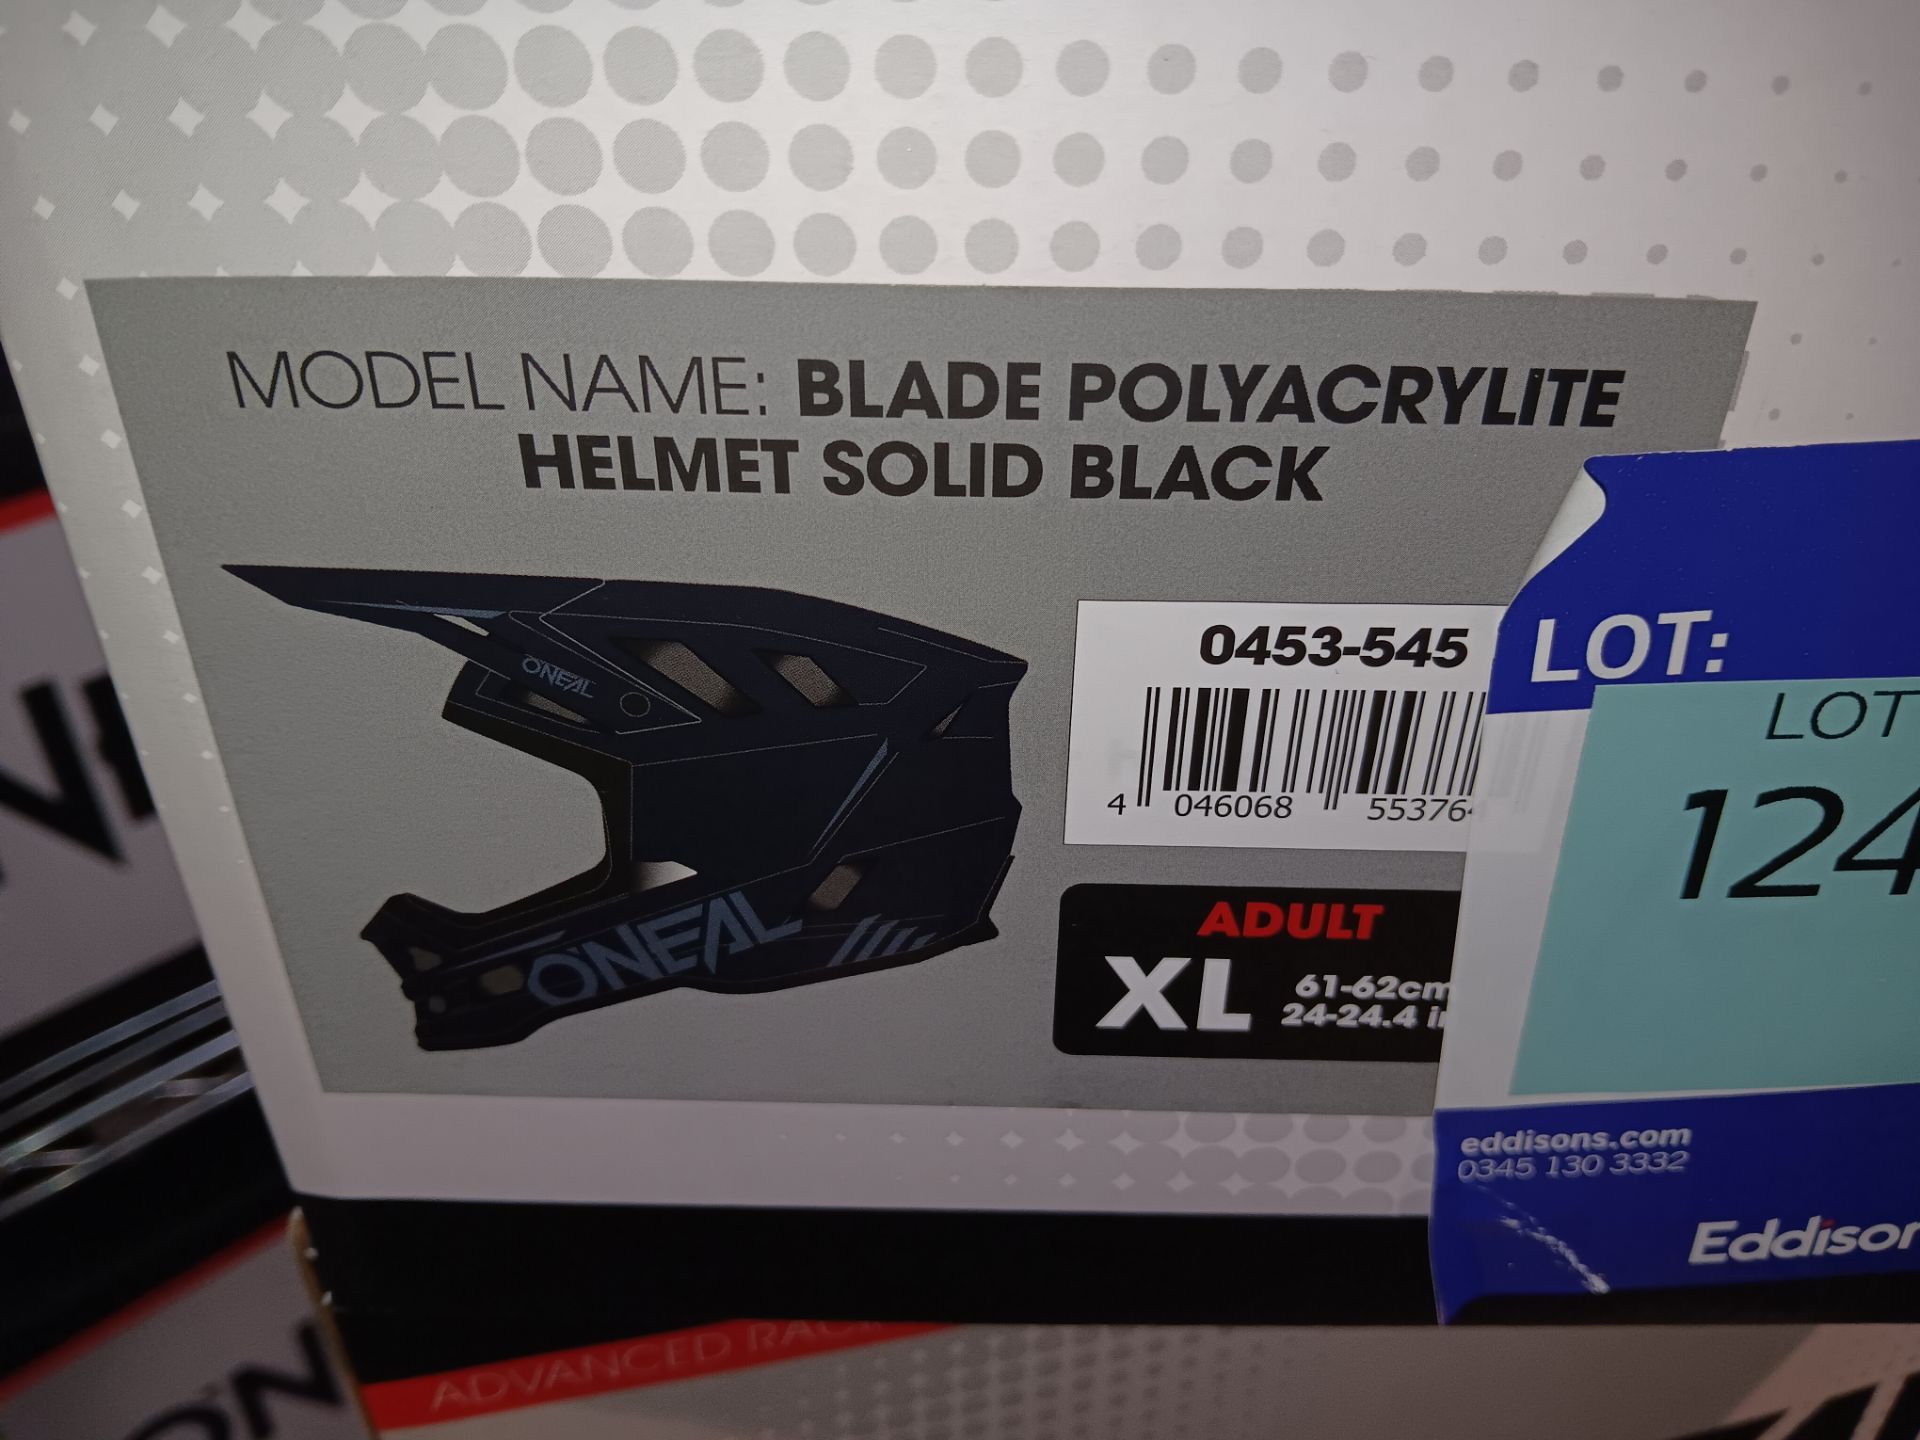 O'Neal Blade Polyacrylite Helmet, Solid Black (Adult XL), Boxed - Image 2 of 2